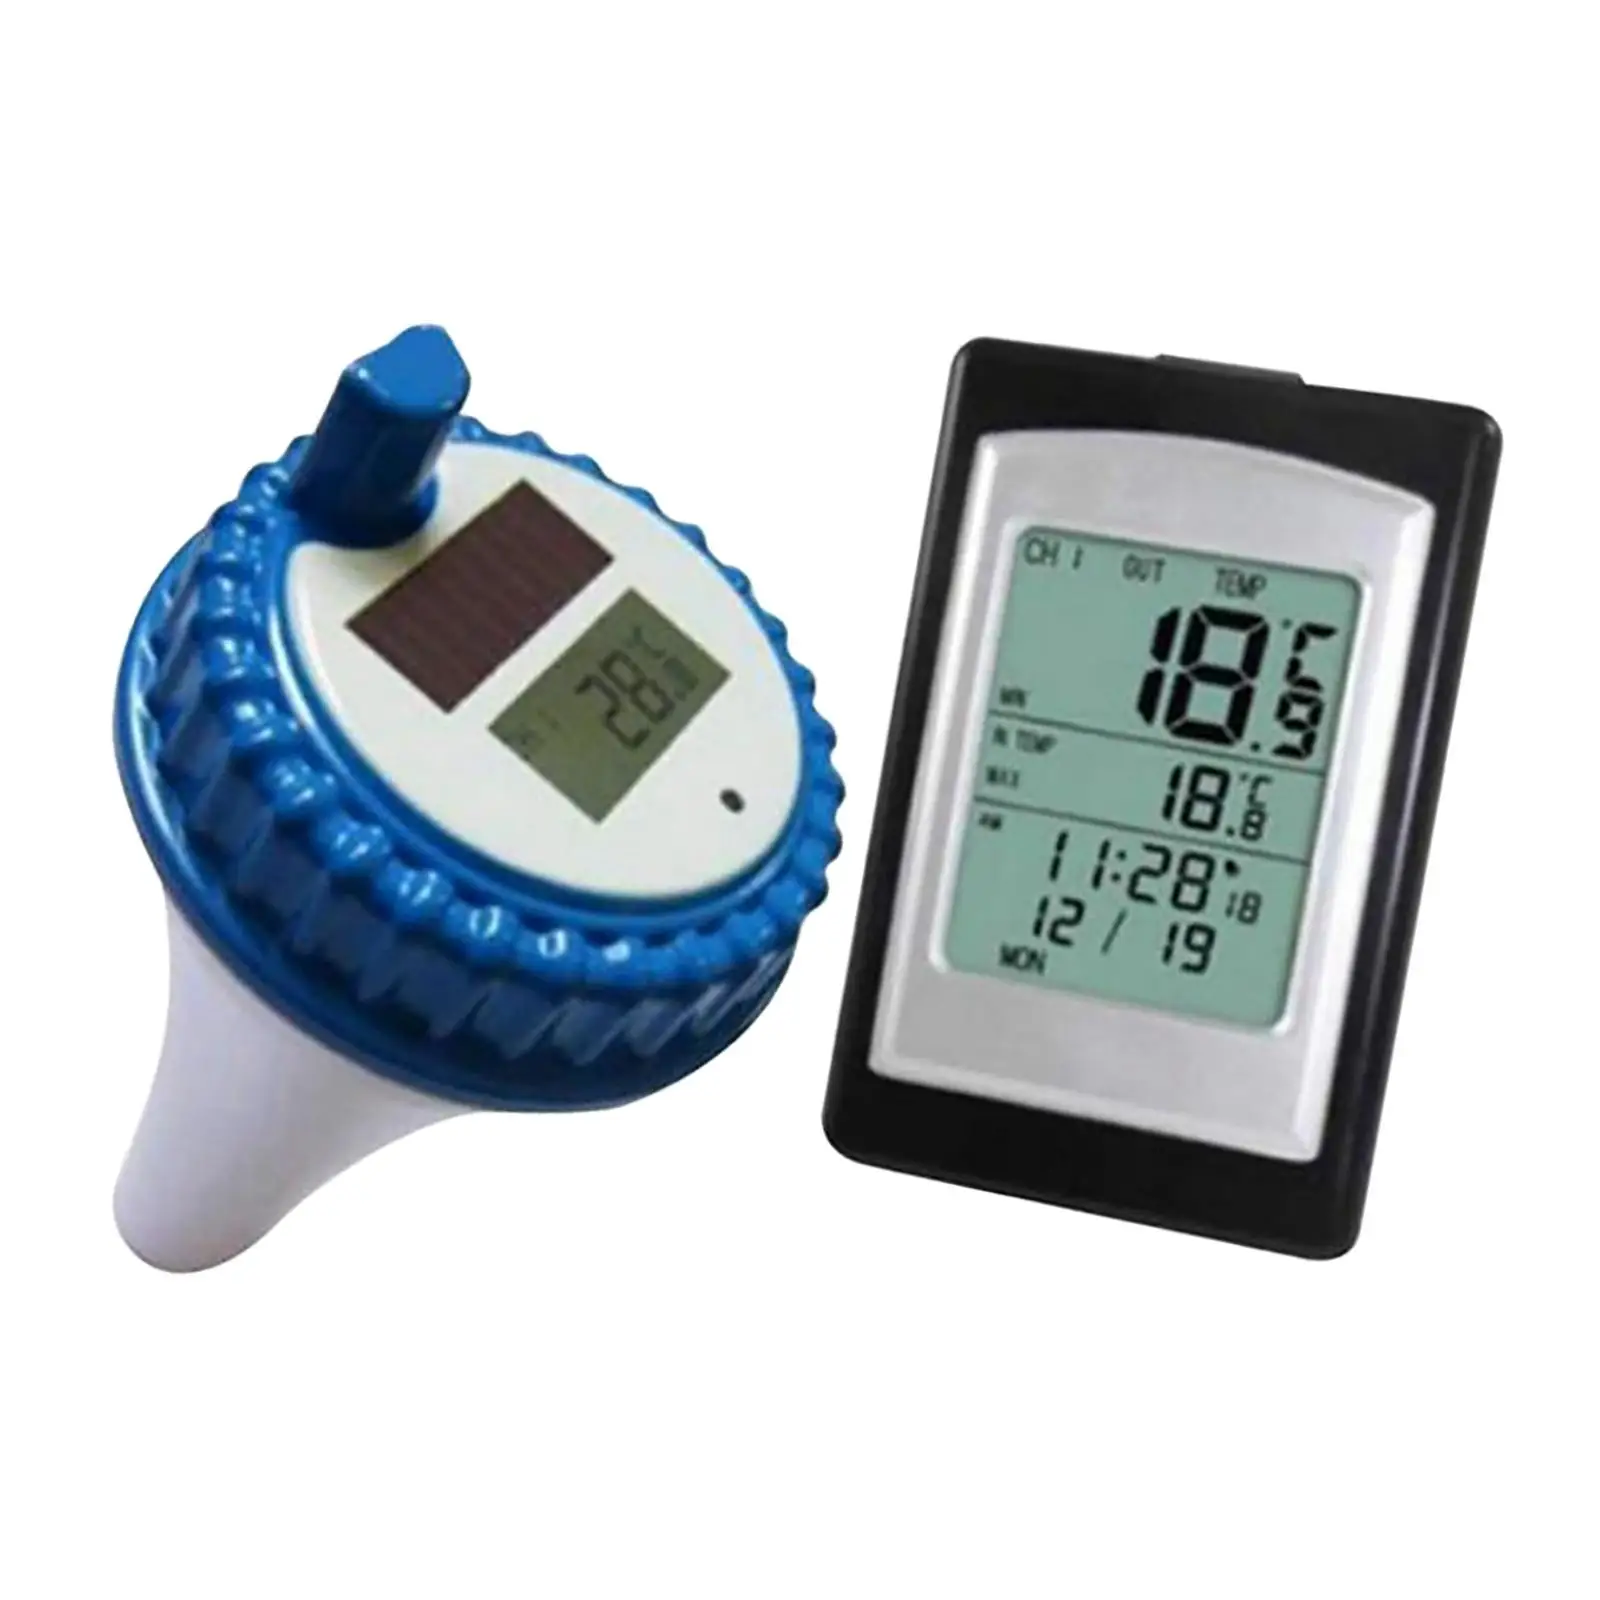 Solar Powered Pool Thermometer Digital for Swimming Water Pond